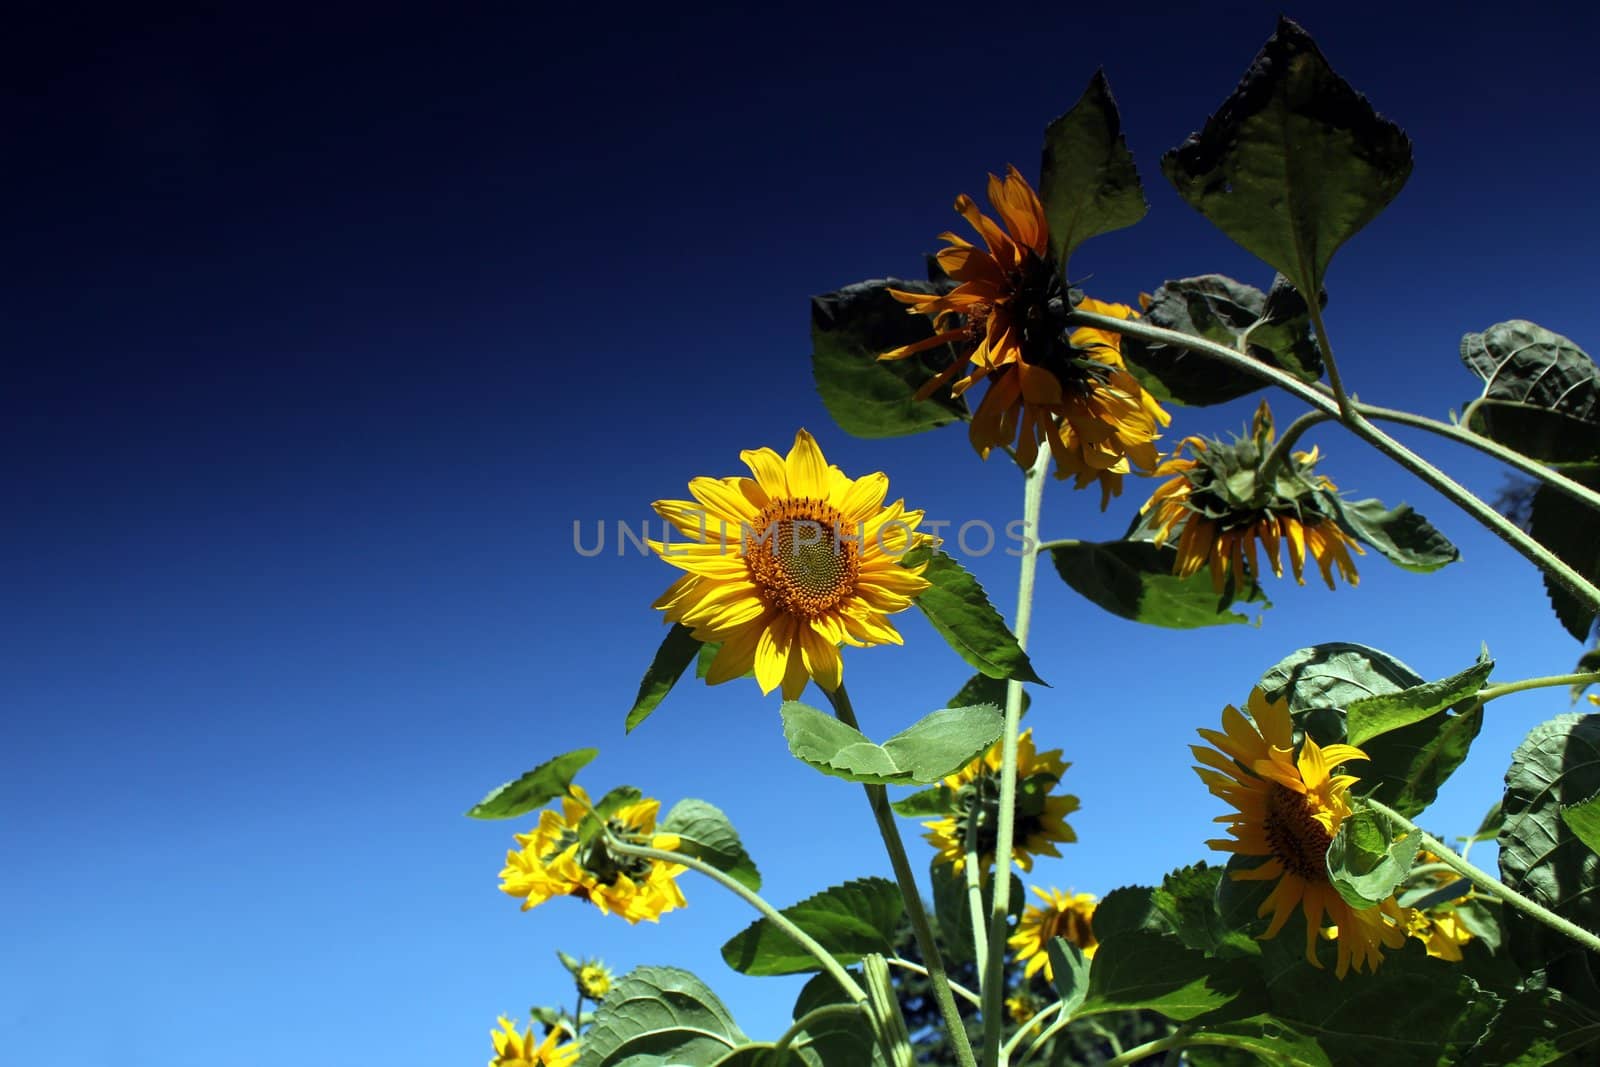 sunflowers and blue summer sky by Teka77